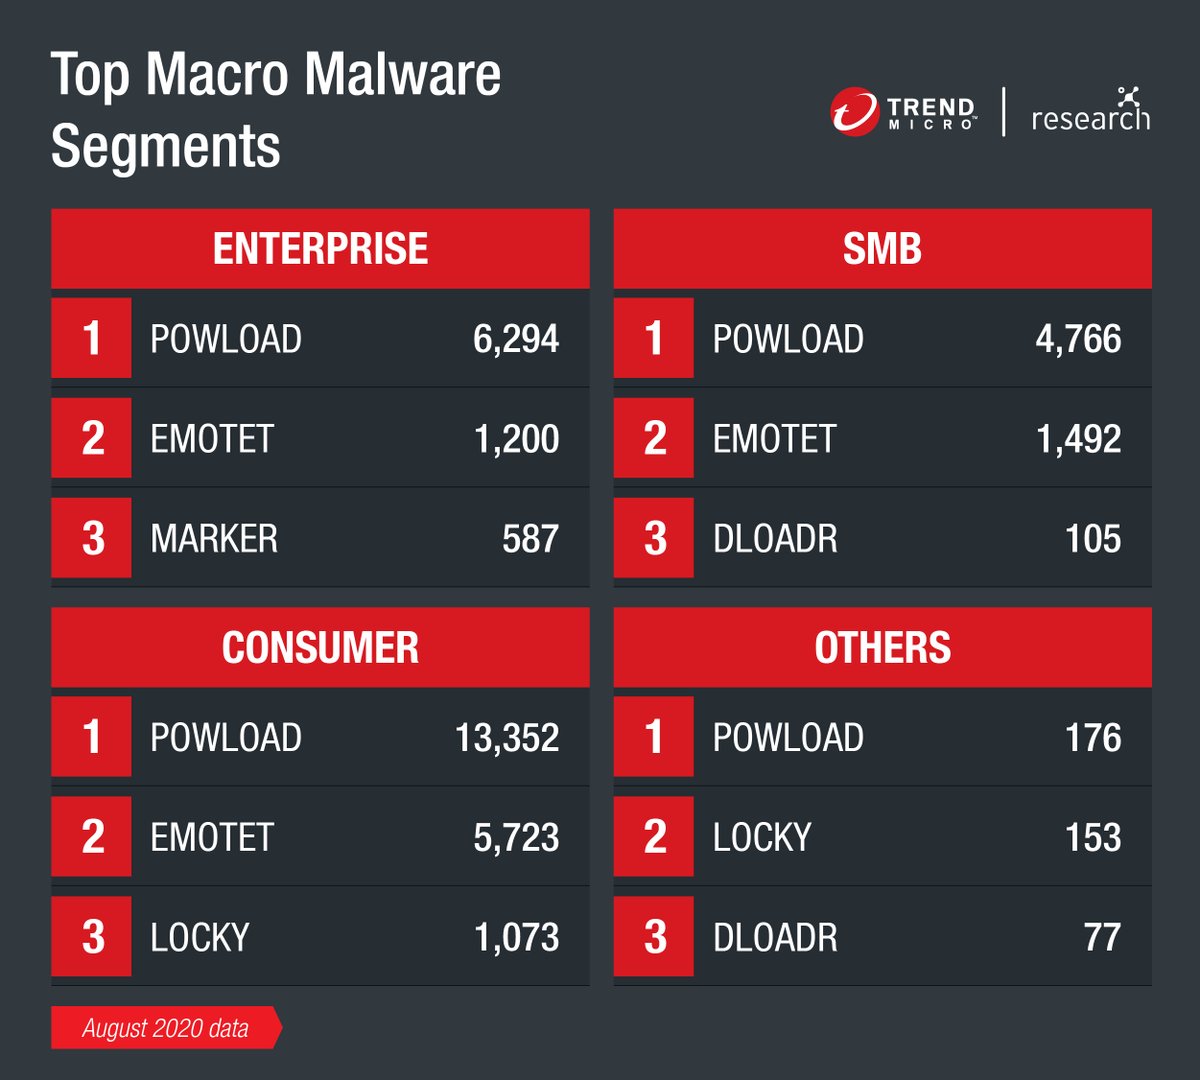 In our August  #FastFacts data, the  #Consumer segment had the highest number of detections for the macro  #malware family  #Powload. The total number of  #Powload detection for this segment was 13,352.Follow this thread for more updates.